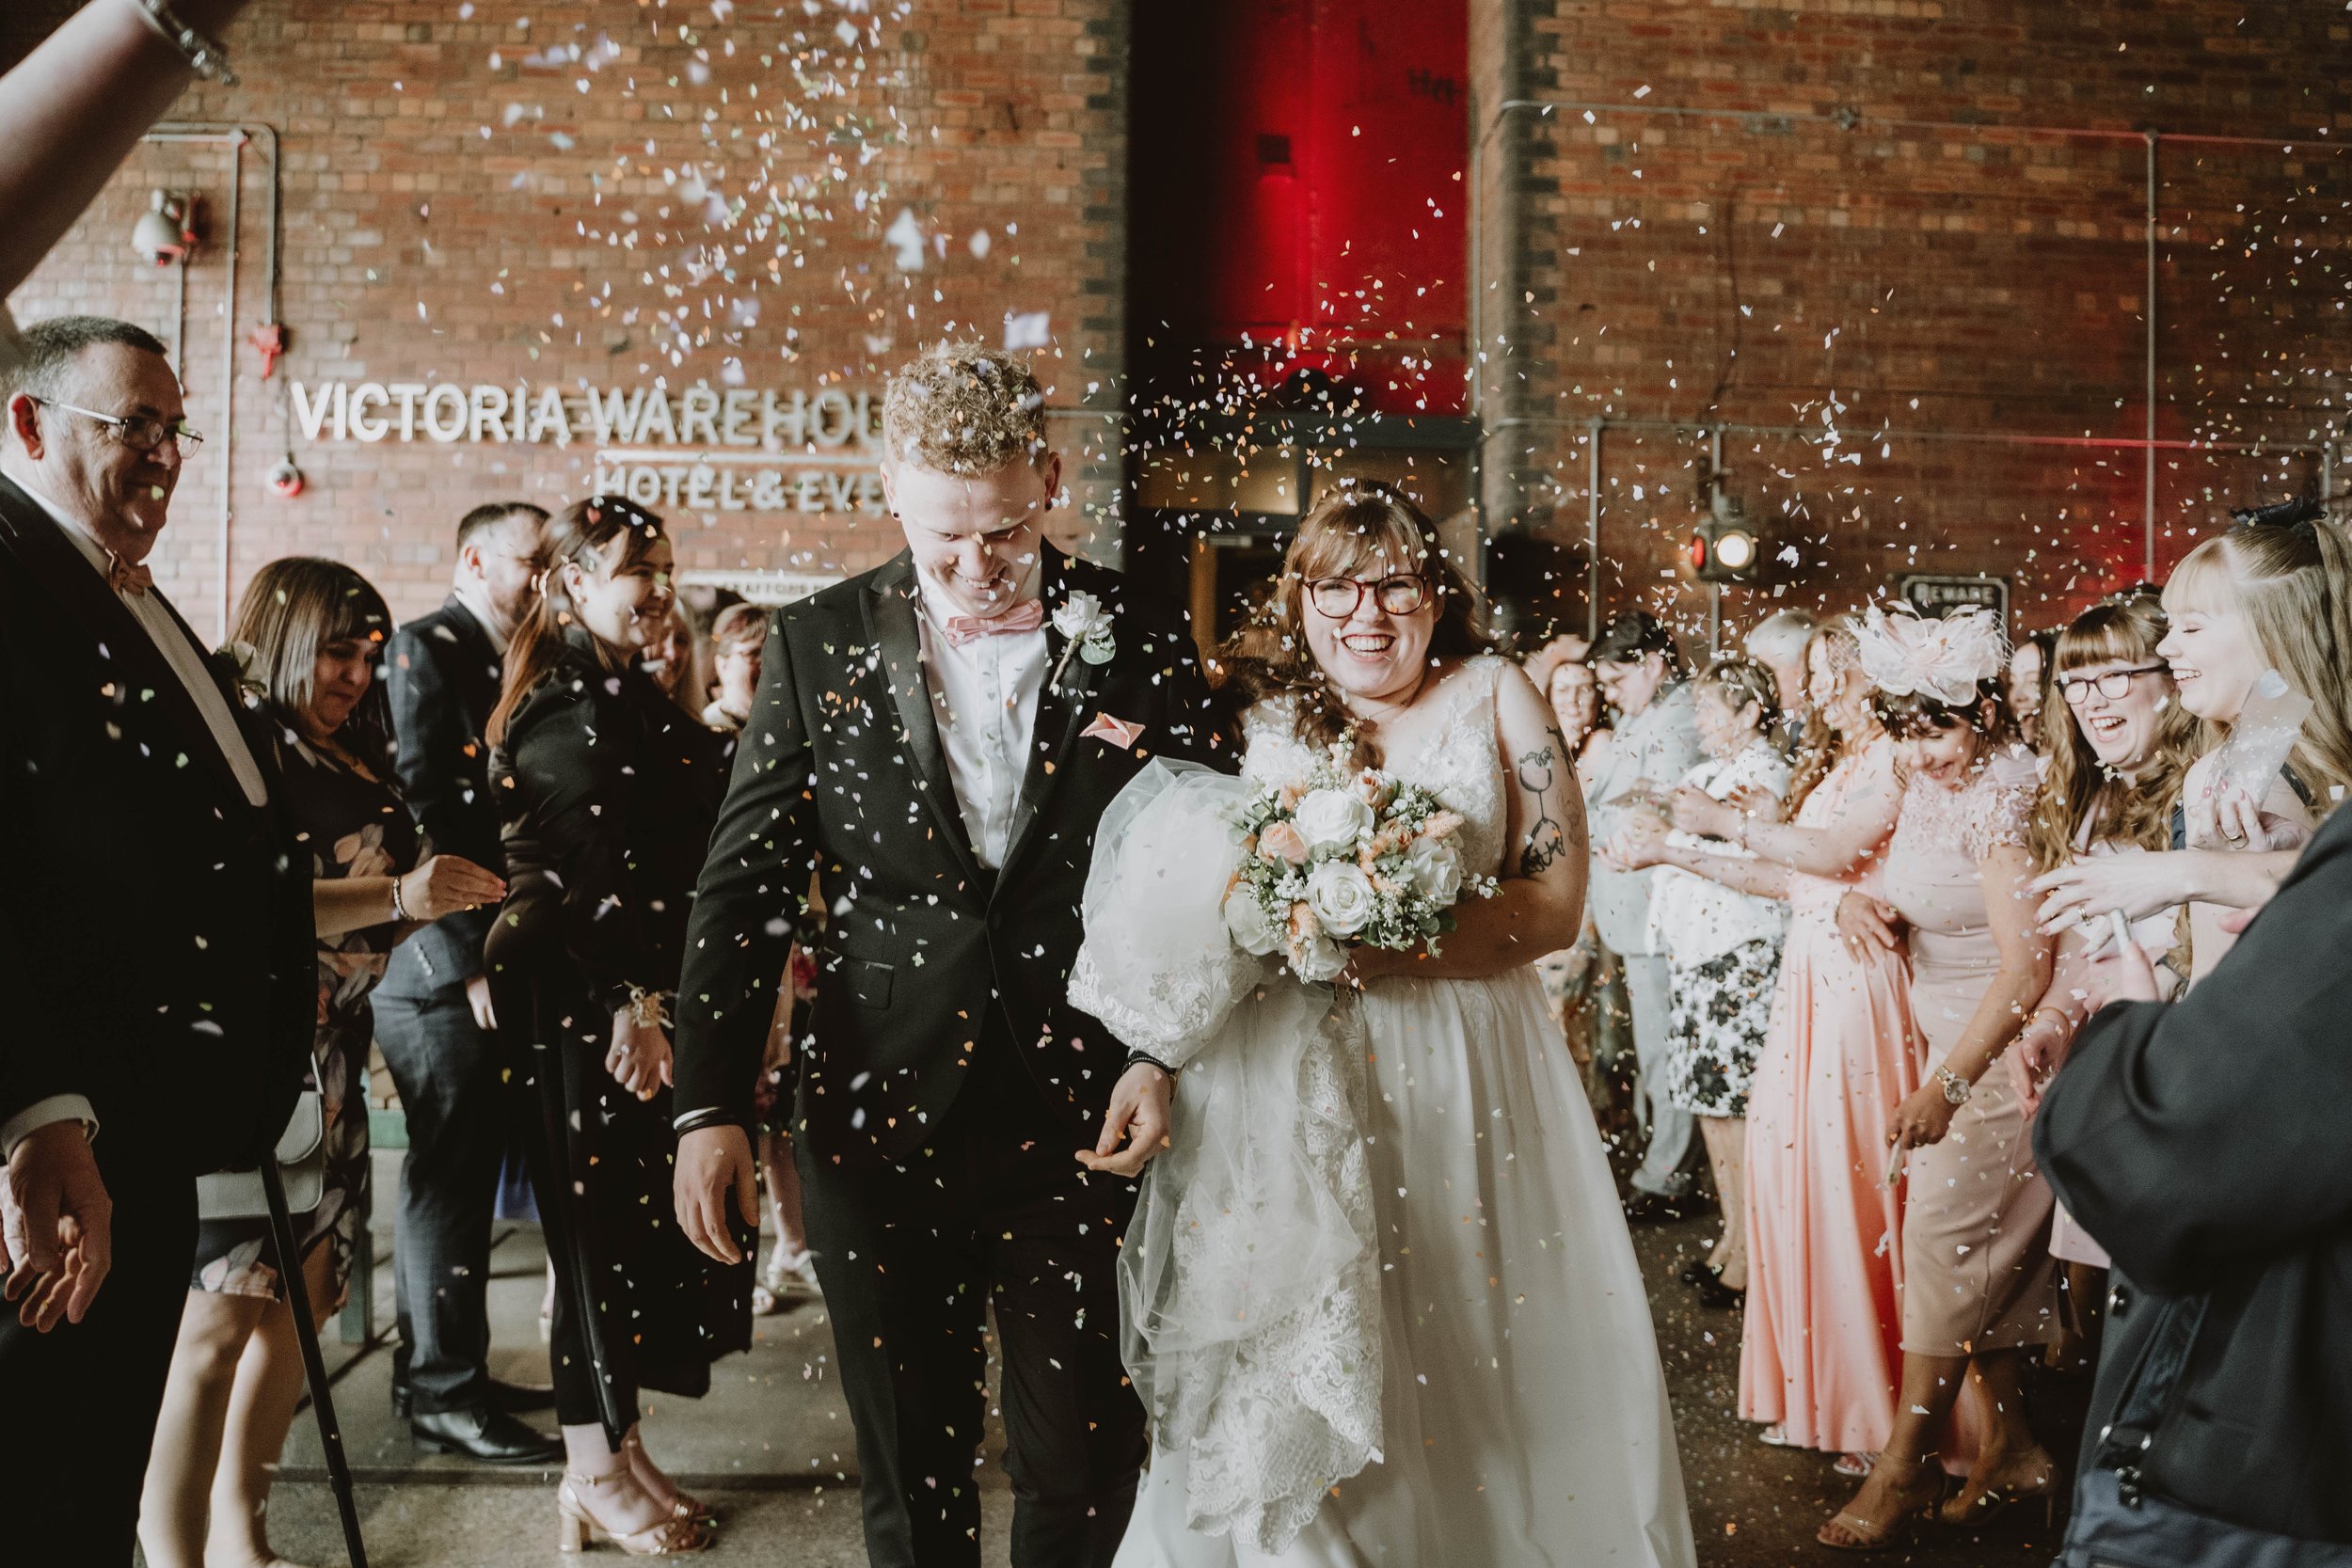  Photographer Credit: Kev Jacutan  Inside a bright exposed brick room within Victoria Warehouse the bride and groom are walking back up the aisle with their wedding guests either side of them throwing pastel confetti.  The bride is wearing a long, cr